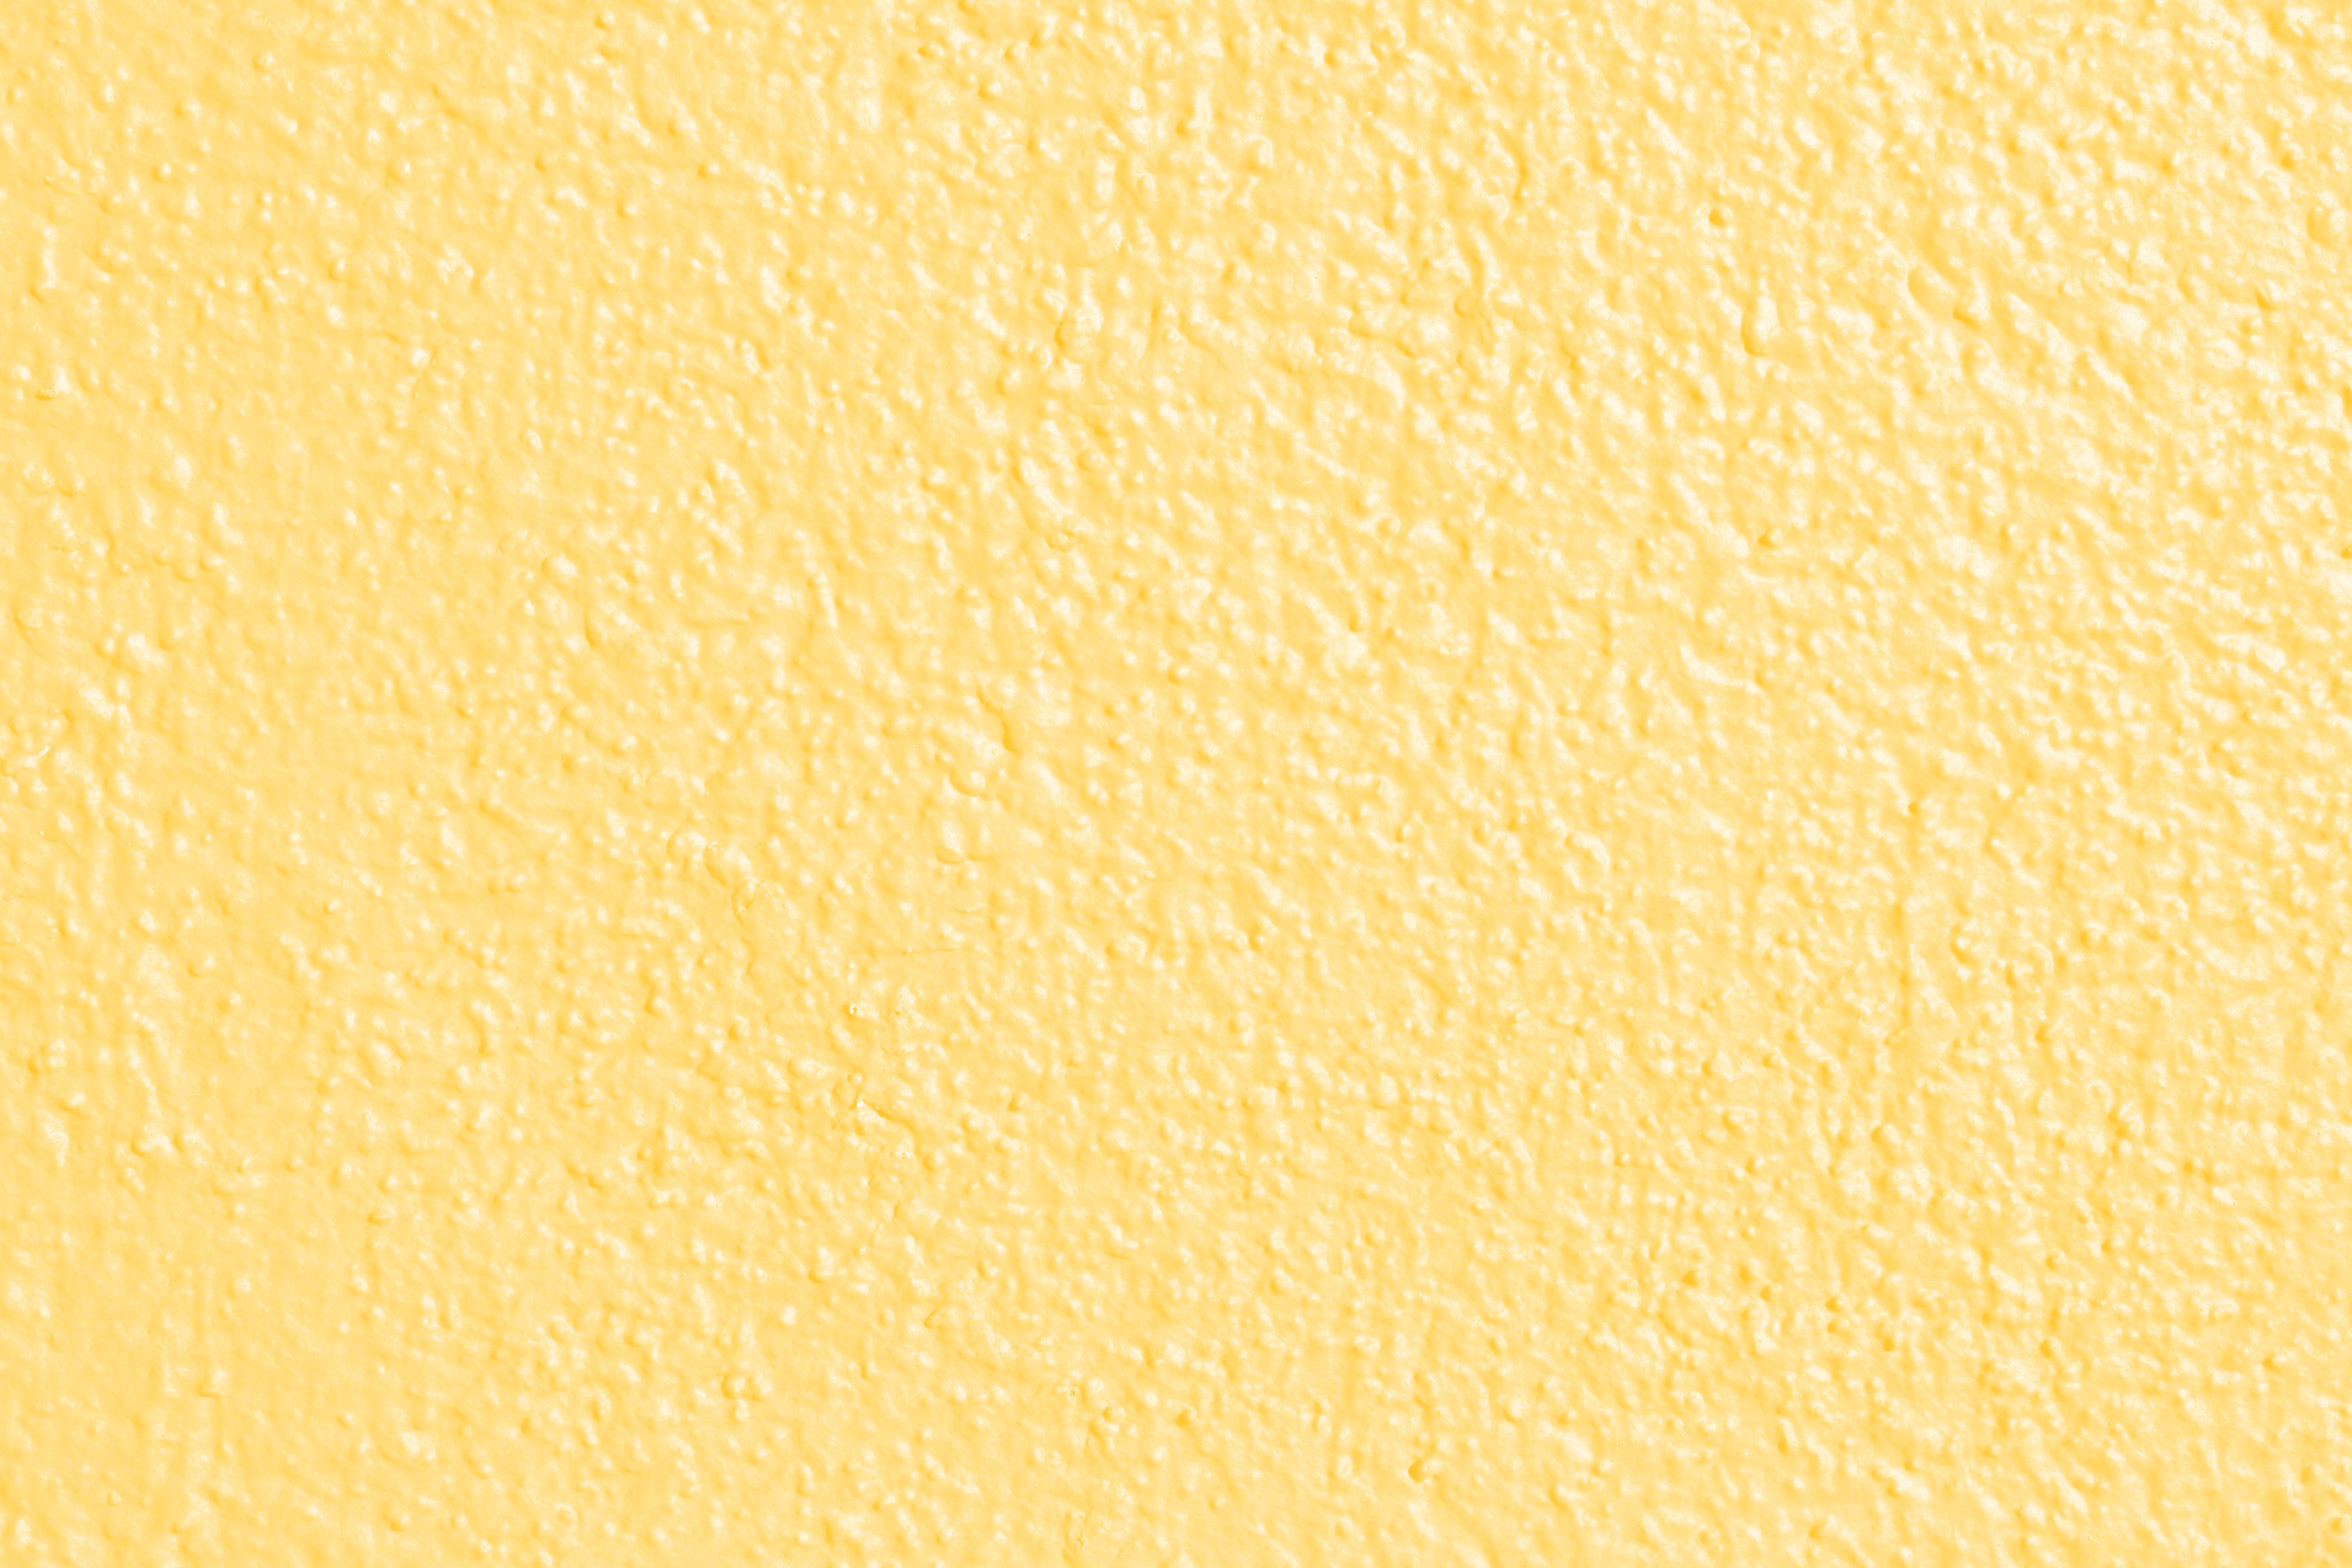 Very Light Yellow - #FFFF9E - The Official Register of Color Names